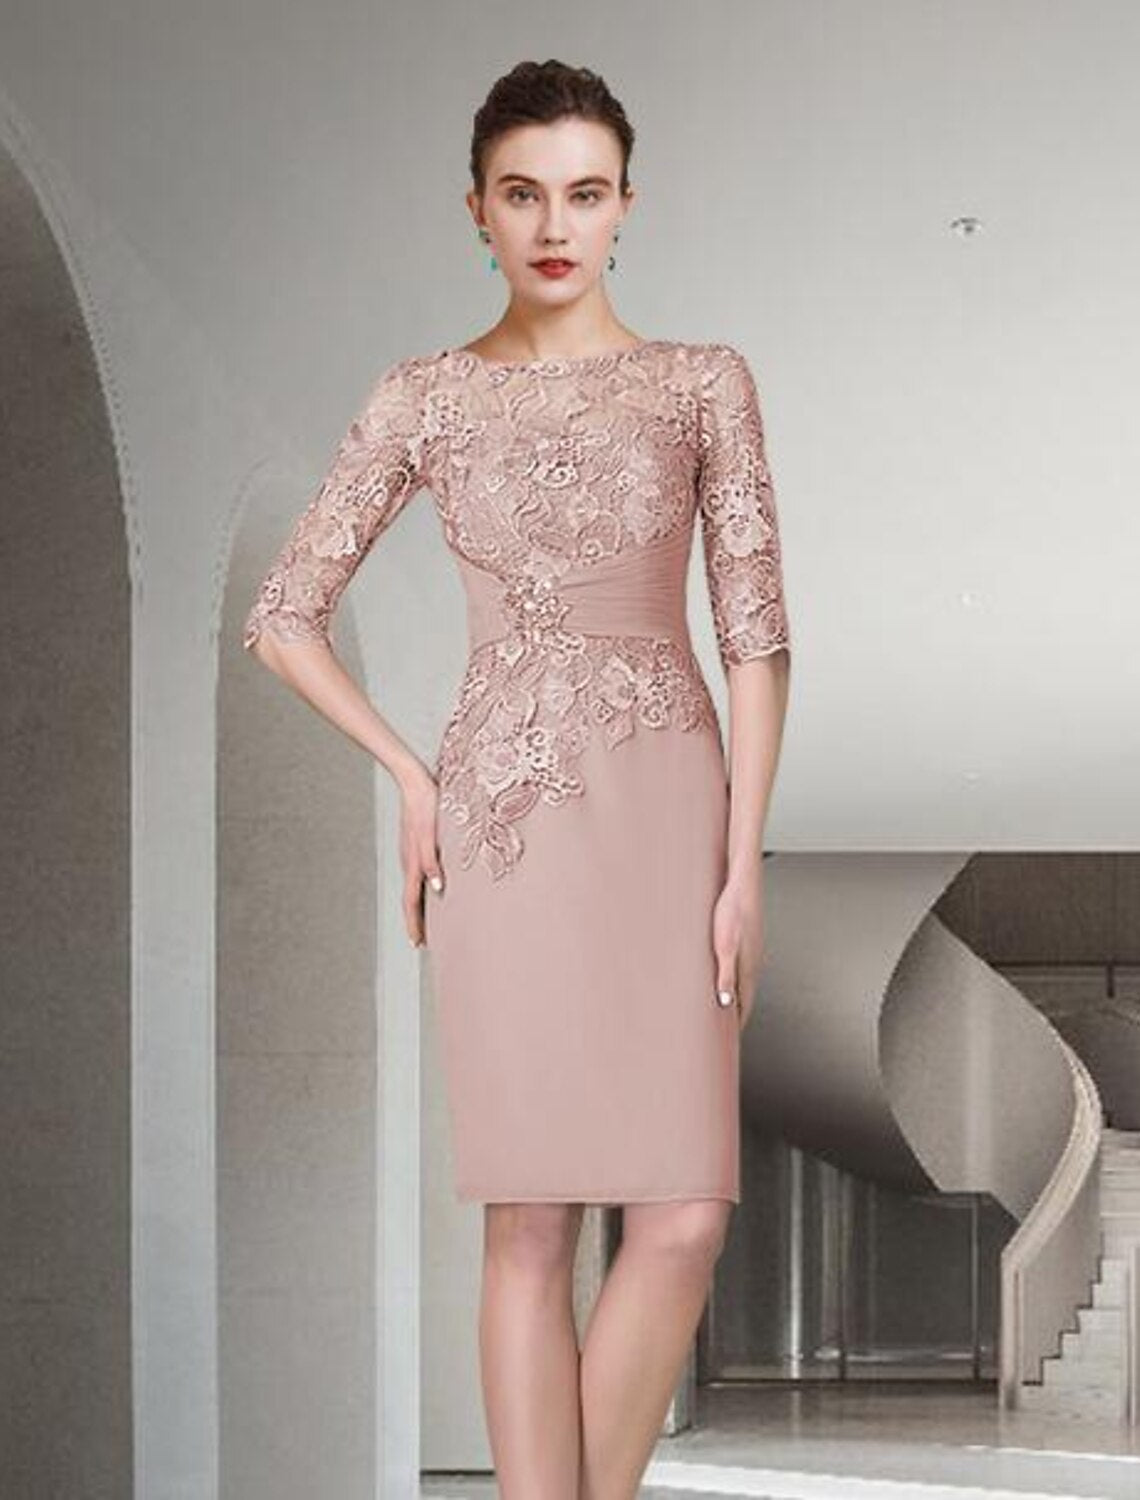 Two Piece Sheath / Column Mother of the Bride Dress Wedding Guest Church Elegant Plus Size Jewel Neck Knee Length Chiffon Lace Half Sleeve Wrap Included Jacket Dresses with Ruched Appliques